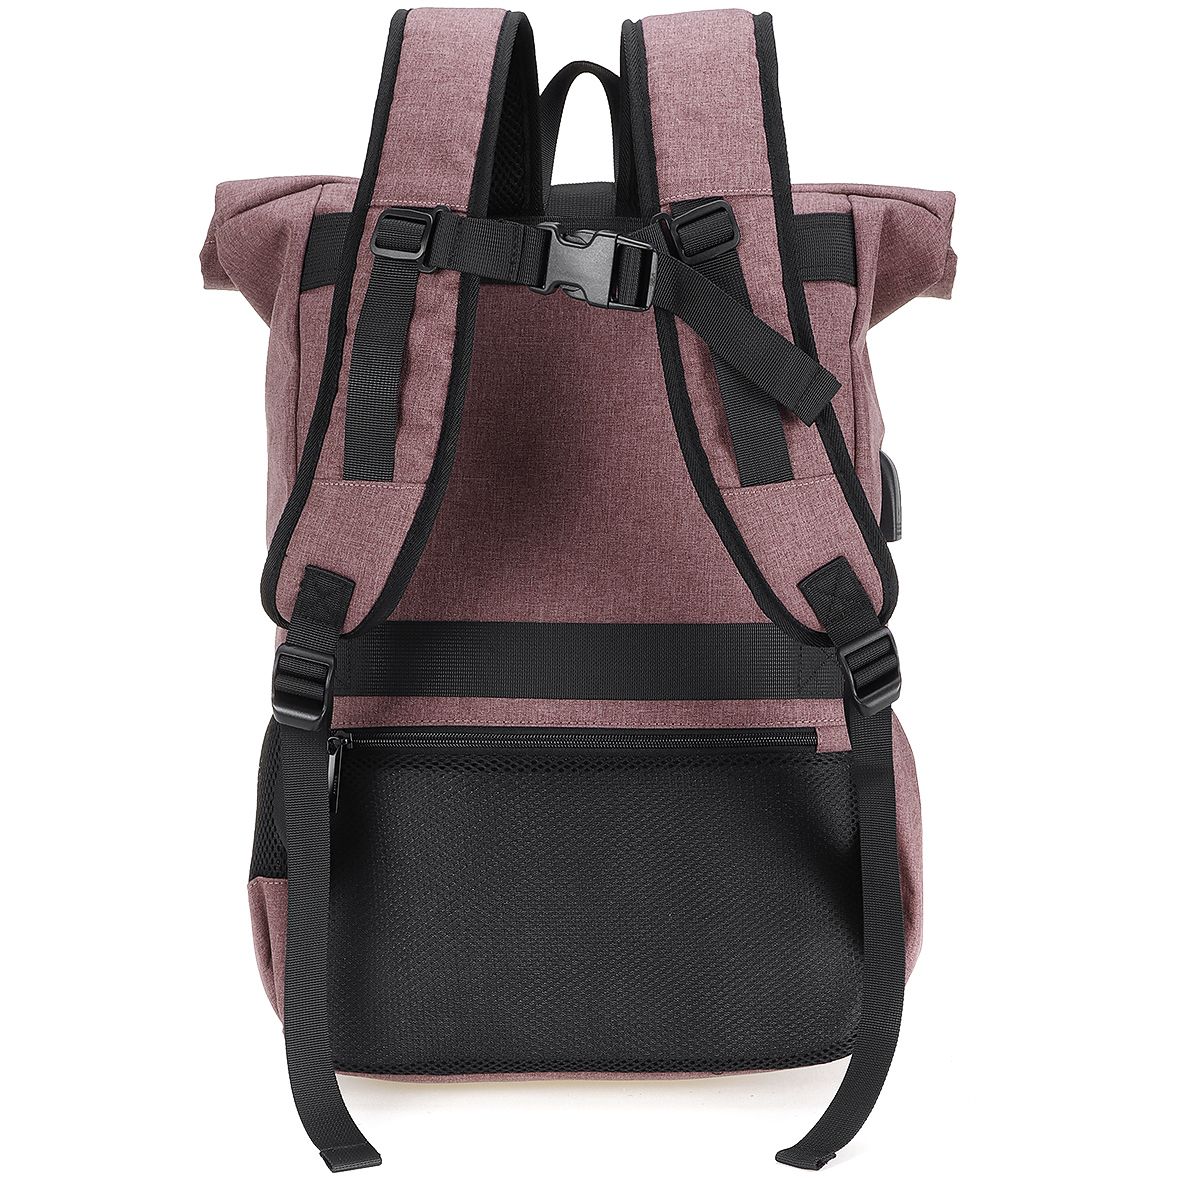 Laptop-Backpack-Men--Women-Roll-Top-Waterproof-Hiking-Backpack-Schoolbag-with-Laptop-Compartment-20--1718904